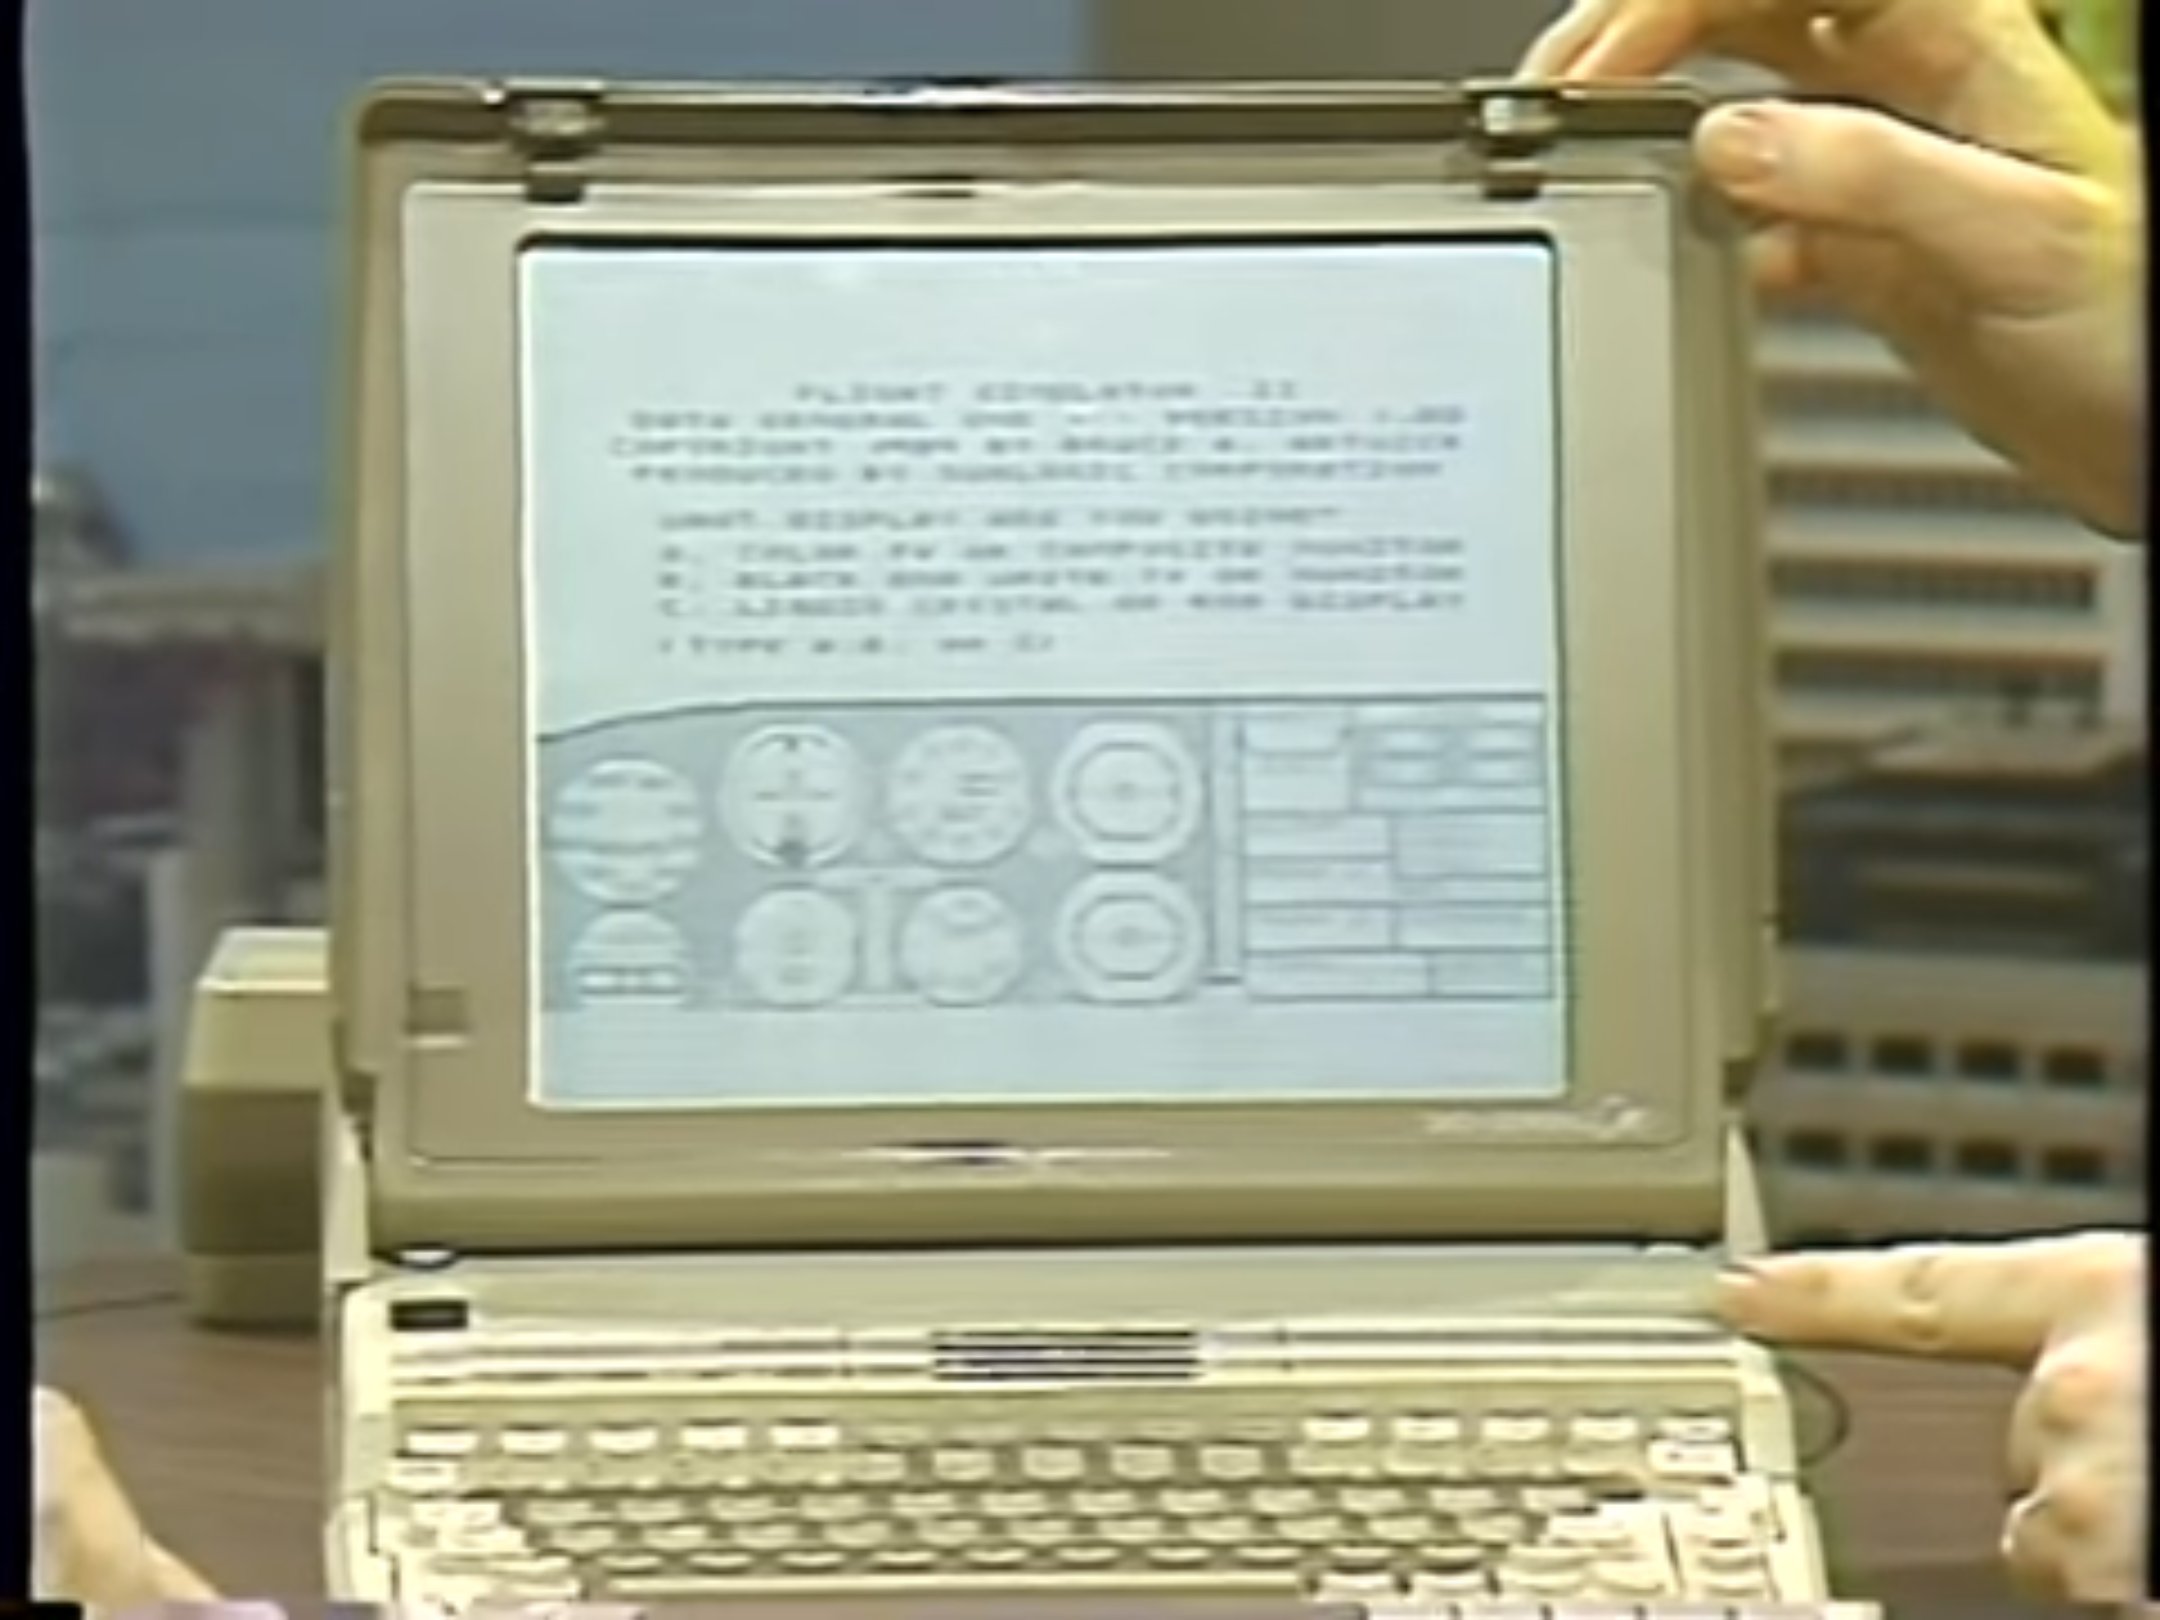 Microsoft Flight Simulator running on a black-and-white display of a Data General-One portable computer during an episode of “Computer Chronicles” from January 1985.